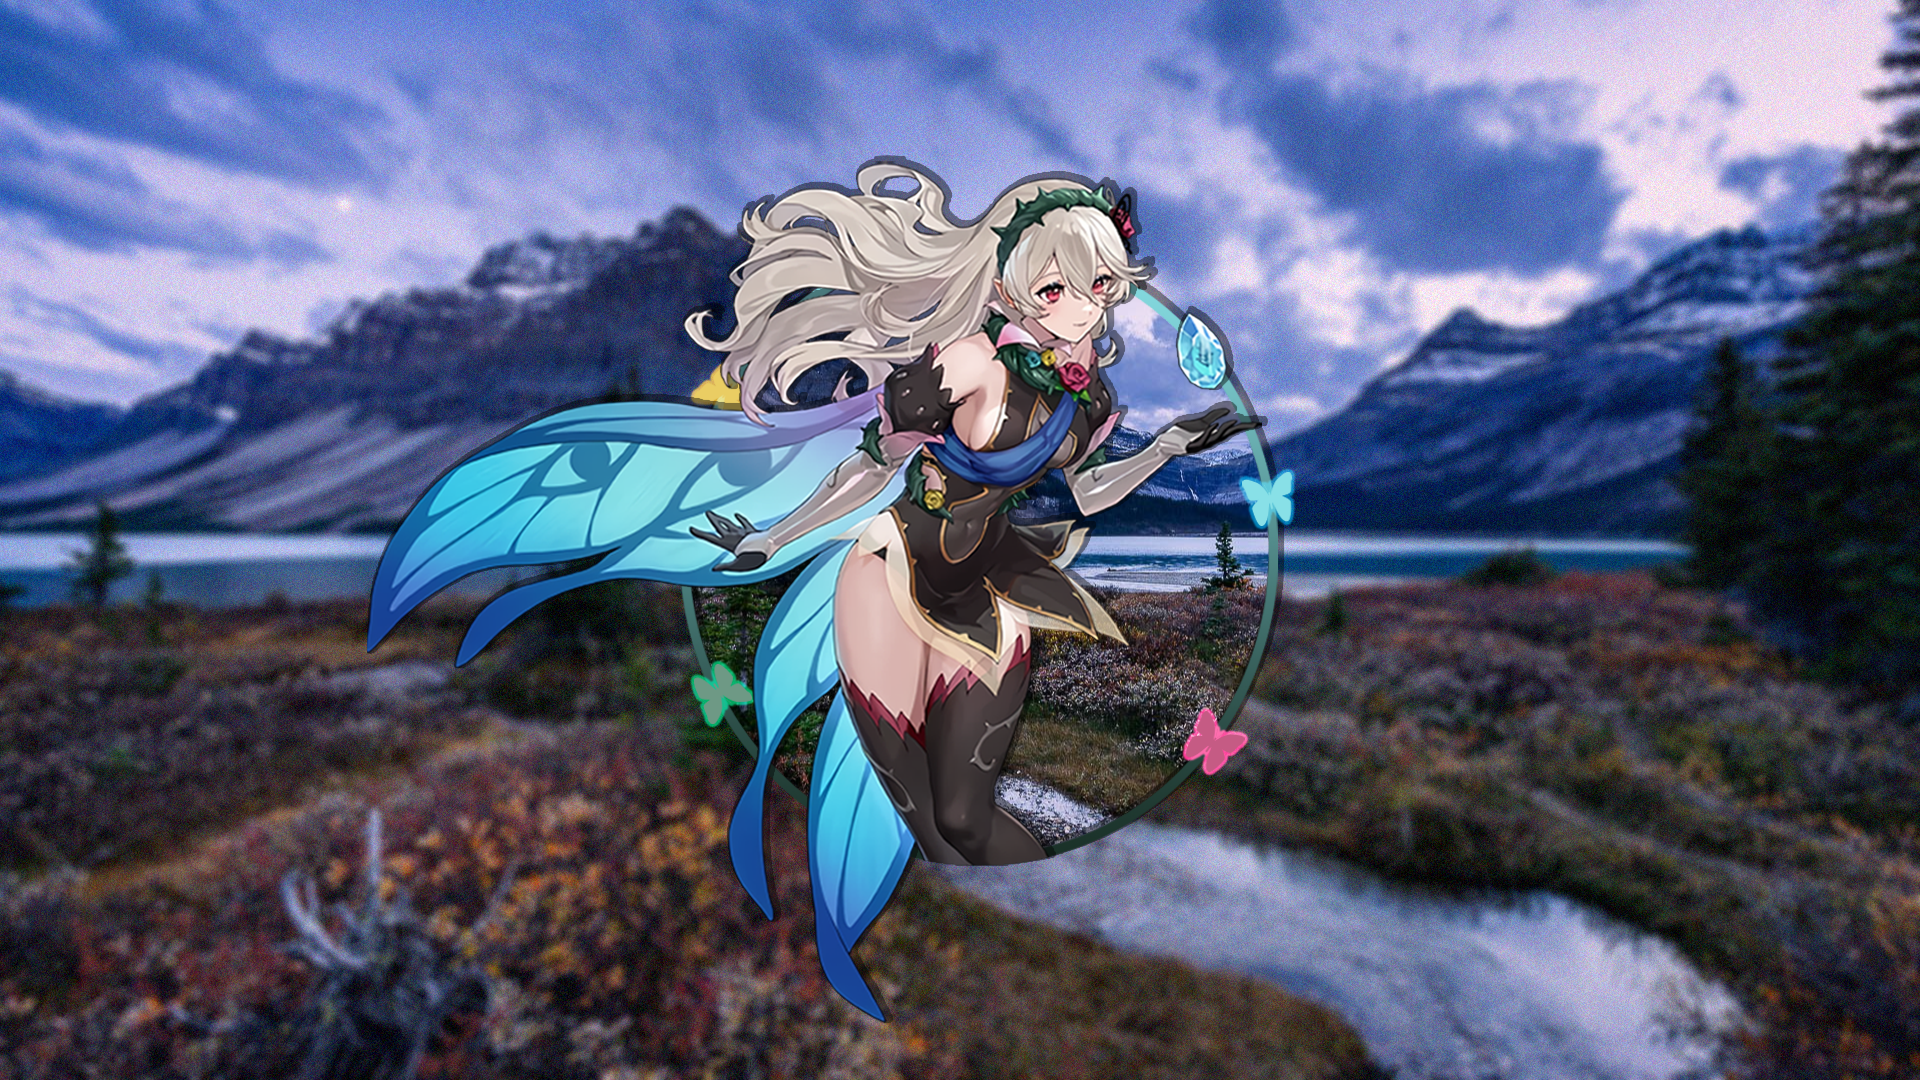 Picture In Picture Anime Girls Corrin Fire Emblem Fates Lake Butterfly 1920x1080